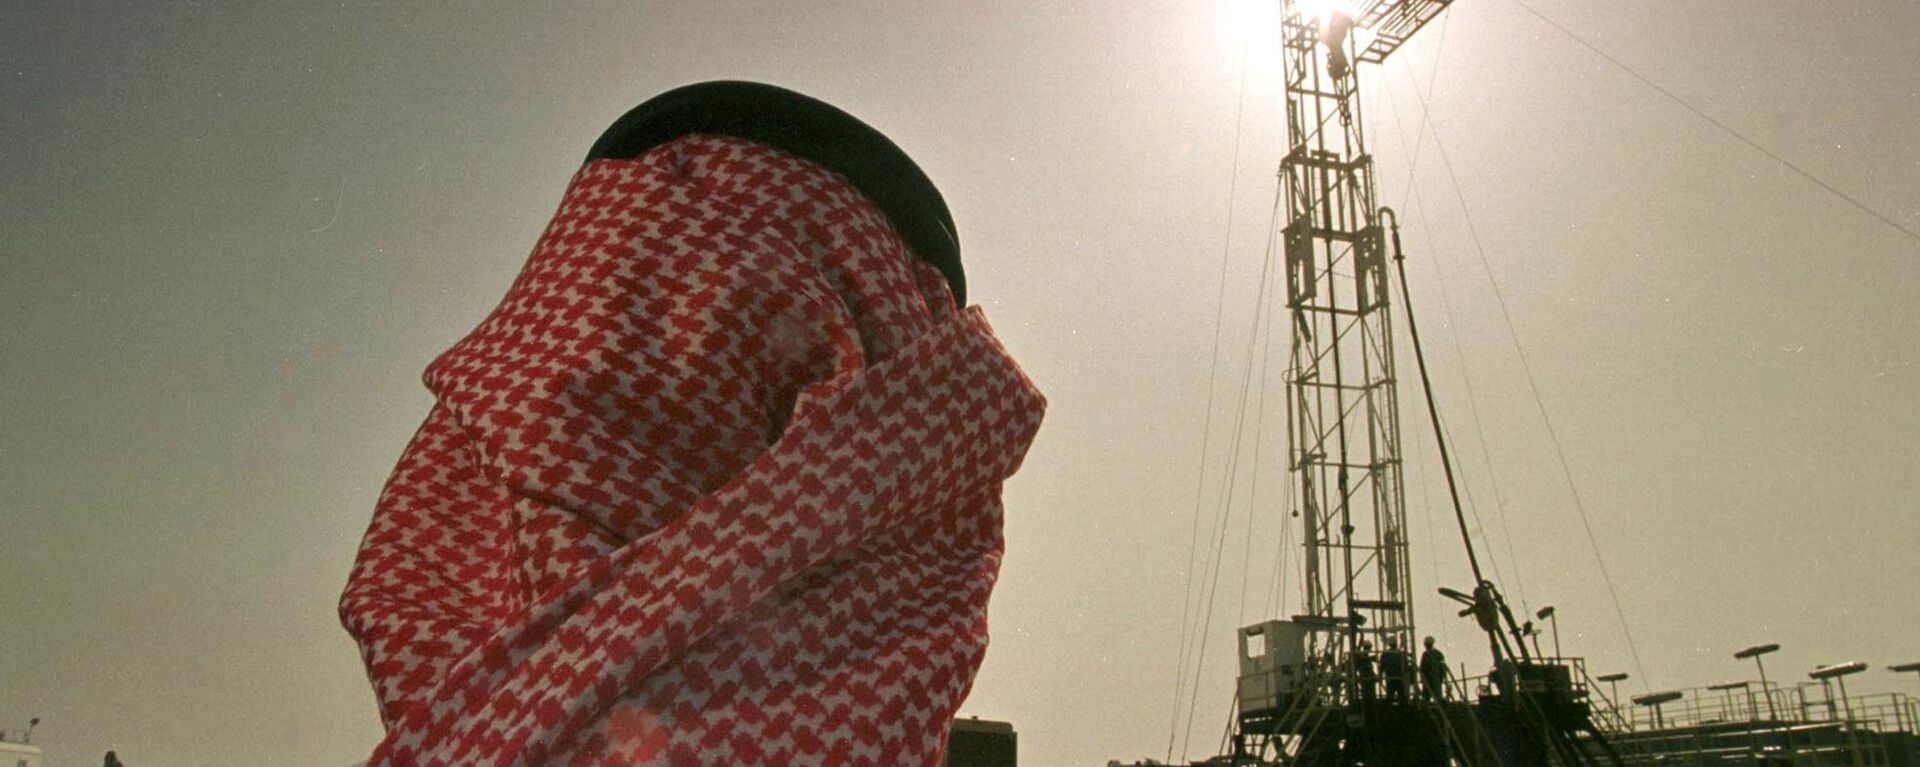 Khaled al Otaiby, an official of the Saudi oil company Aramco watches progress at a rig at the al-Howta oil field. - Sputnik International, 1920, 26.05.2022